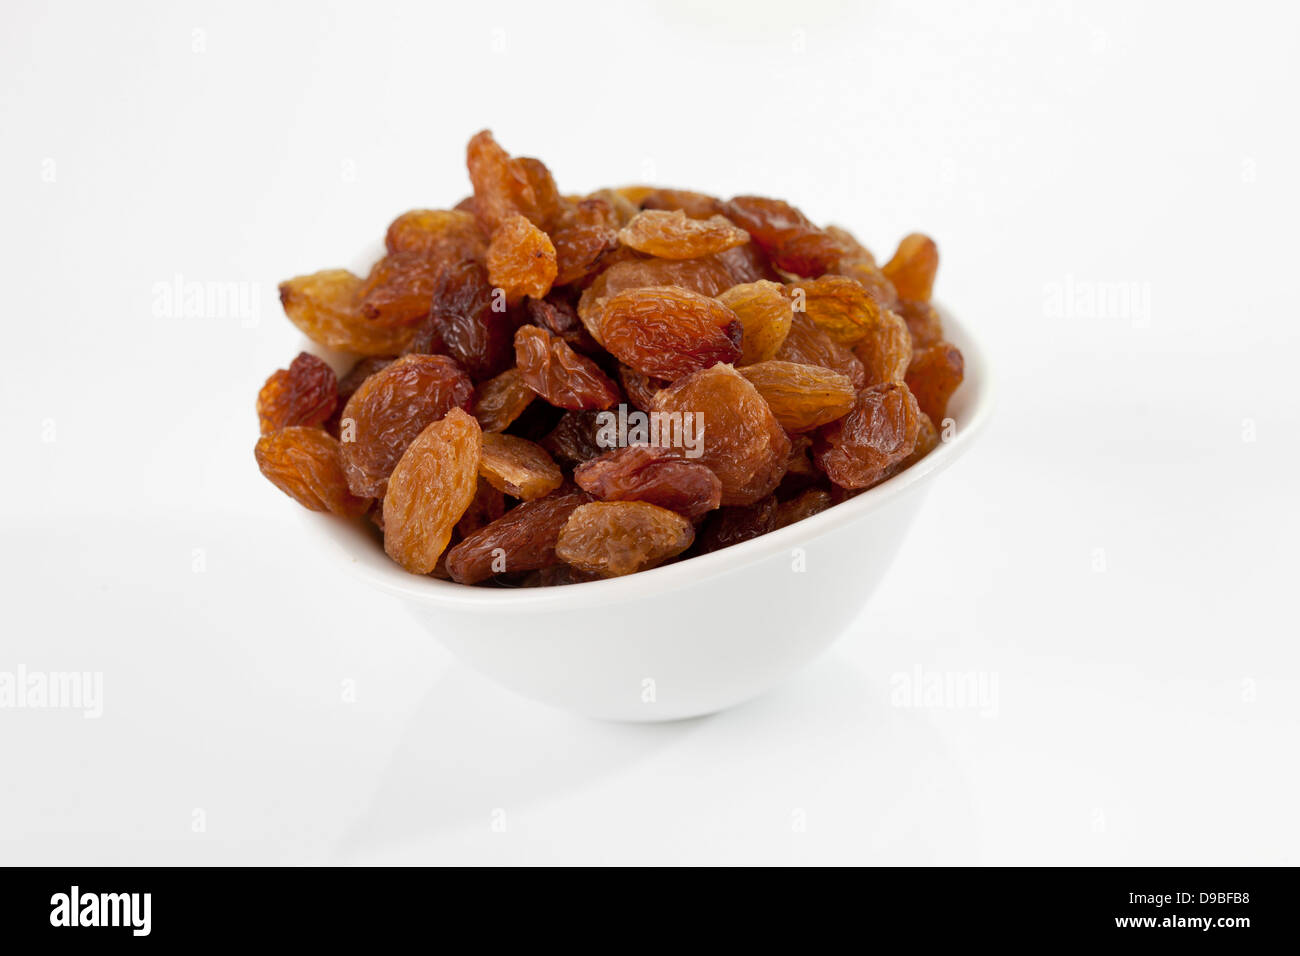 Bowl of sultanas on white background, close up Stock Photo